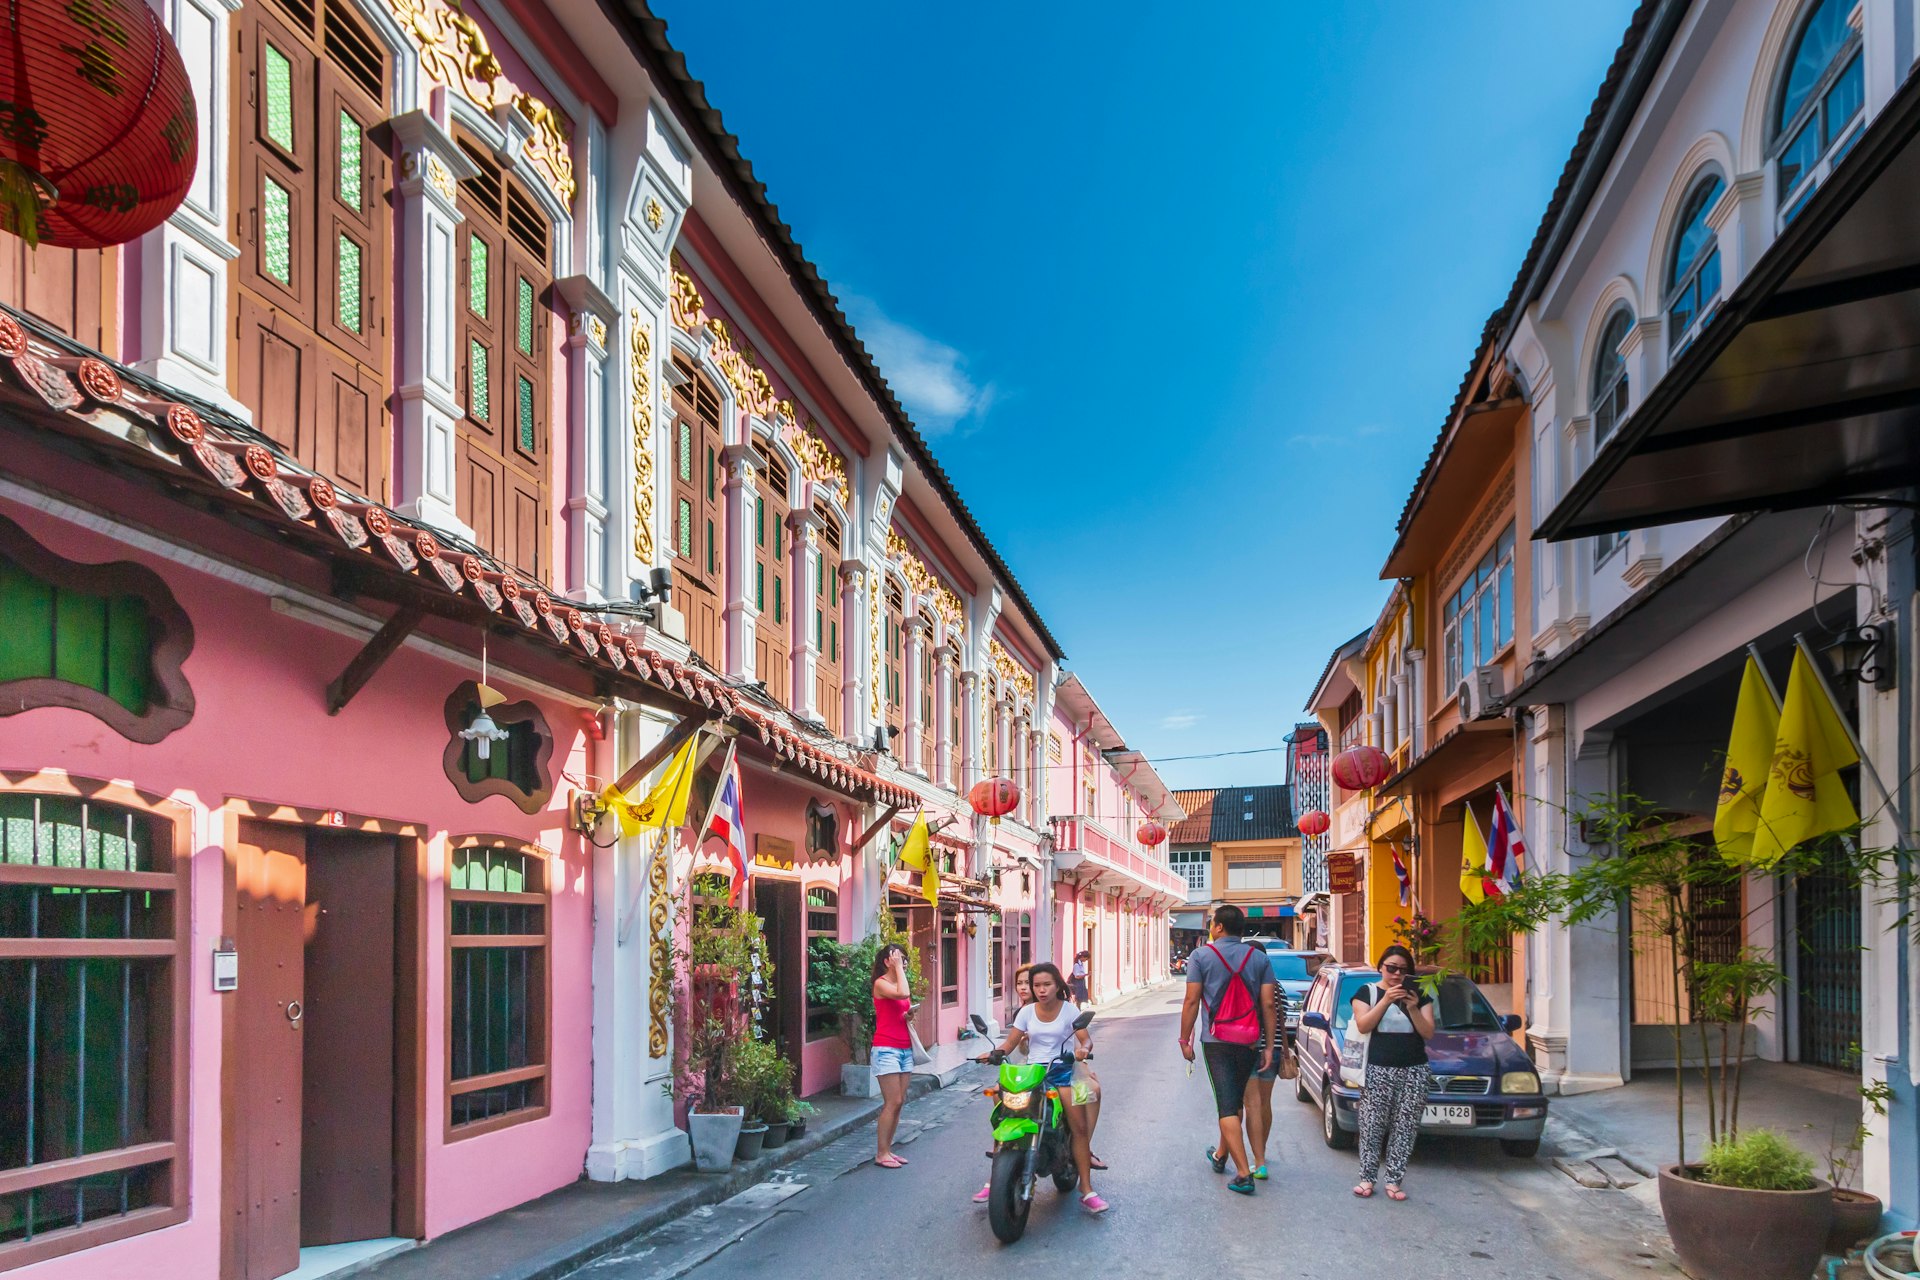 Sino-Portuguese style houses in the old town of Phuket Is a favorite of tourists in Phuket, Thailand. 